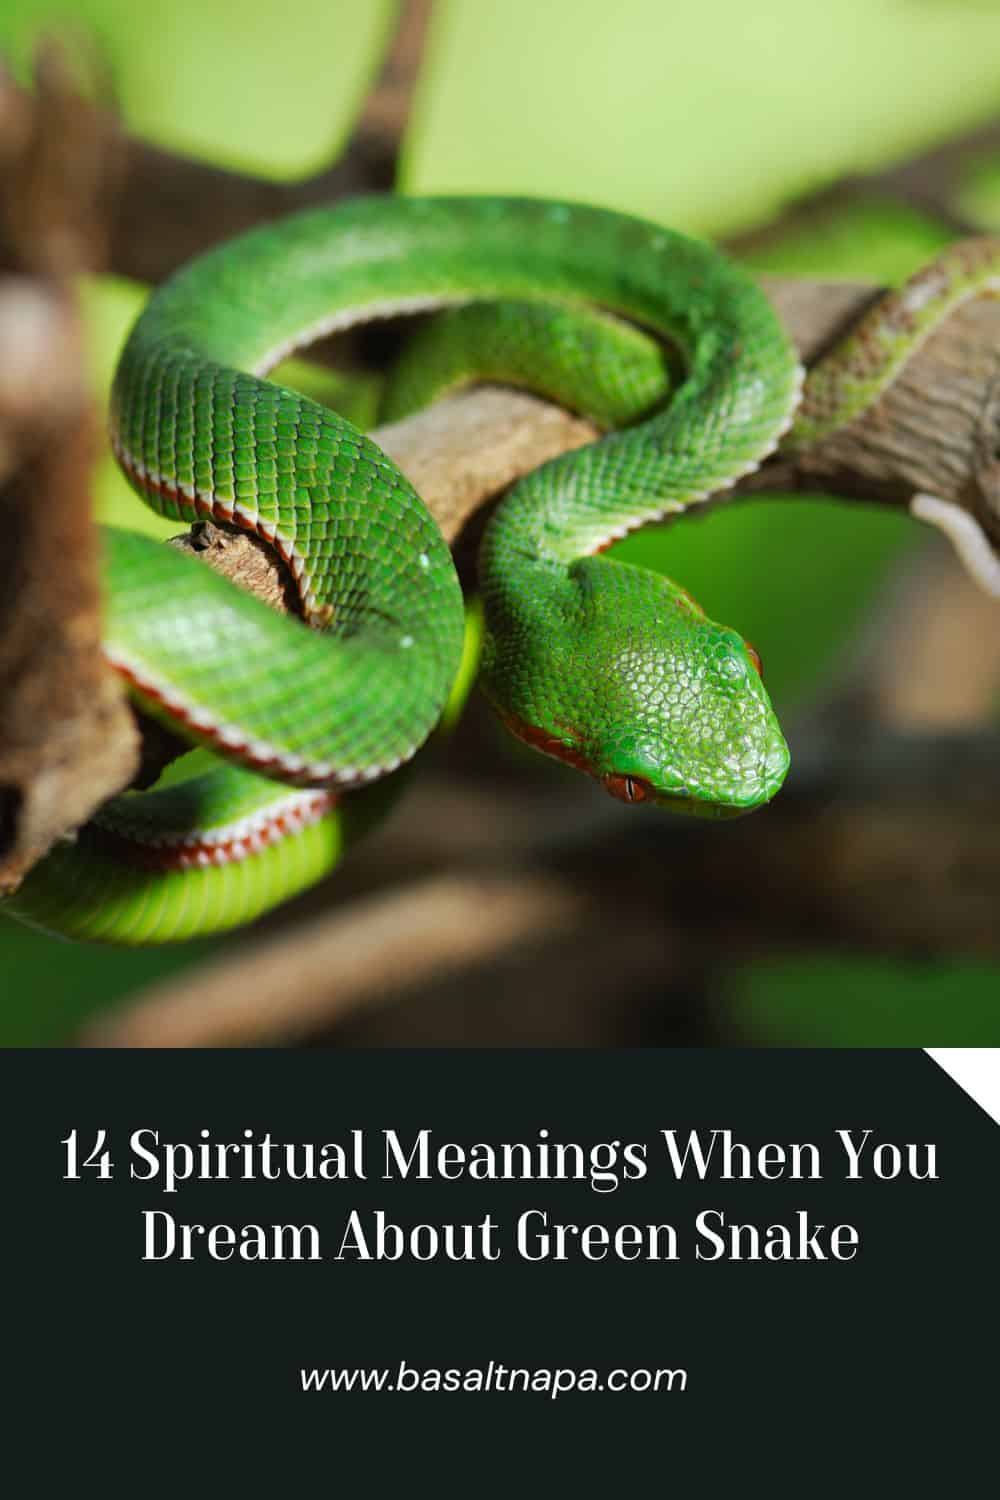 14 Spiritual Meanings When You Dream About Green Snake